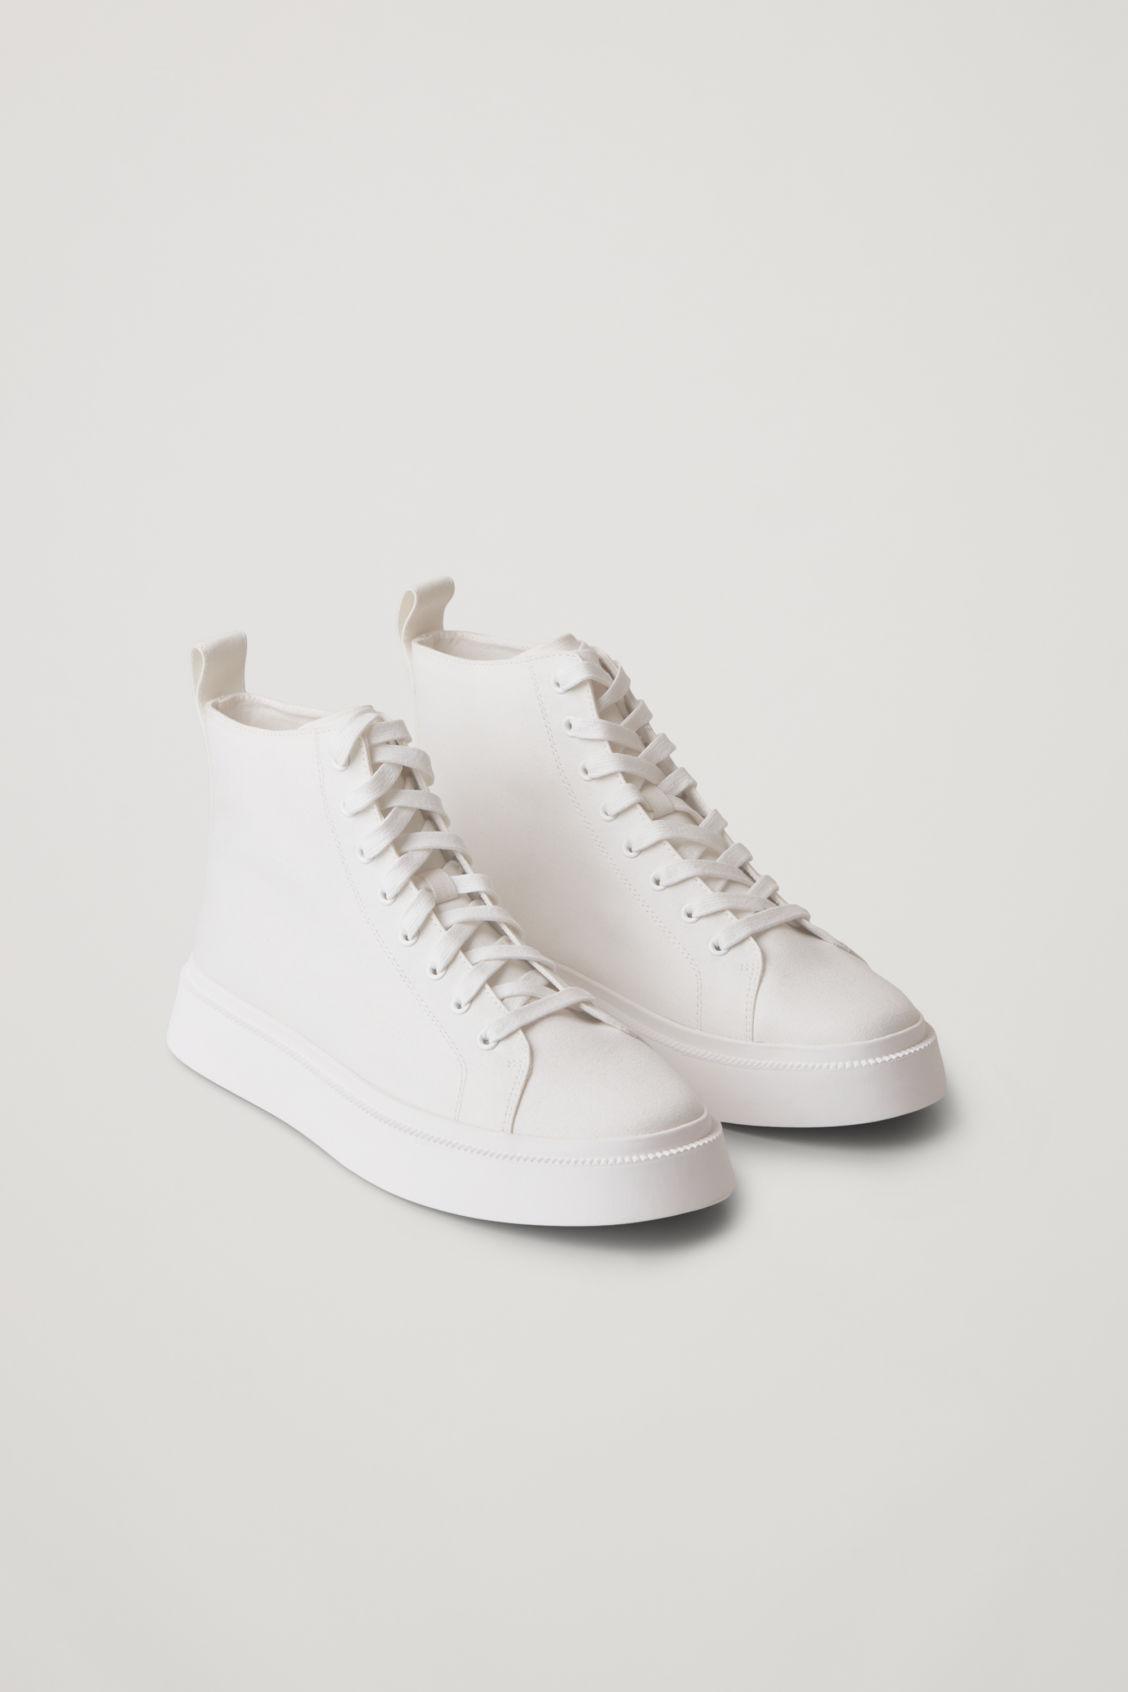 COS Cotton Canvas High-top Sneakers in White | Lyst